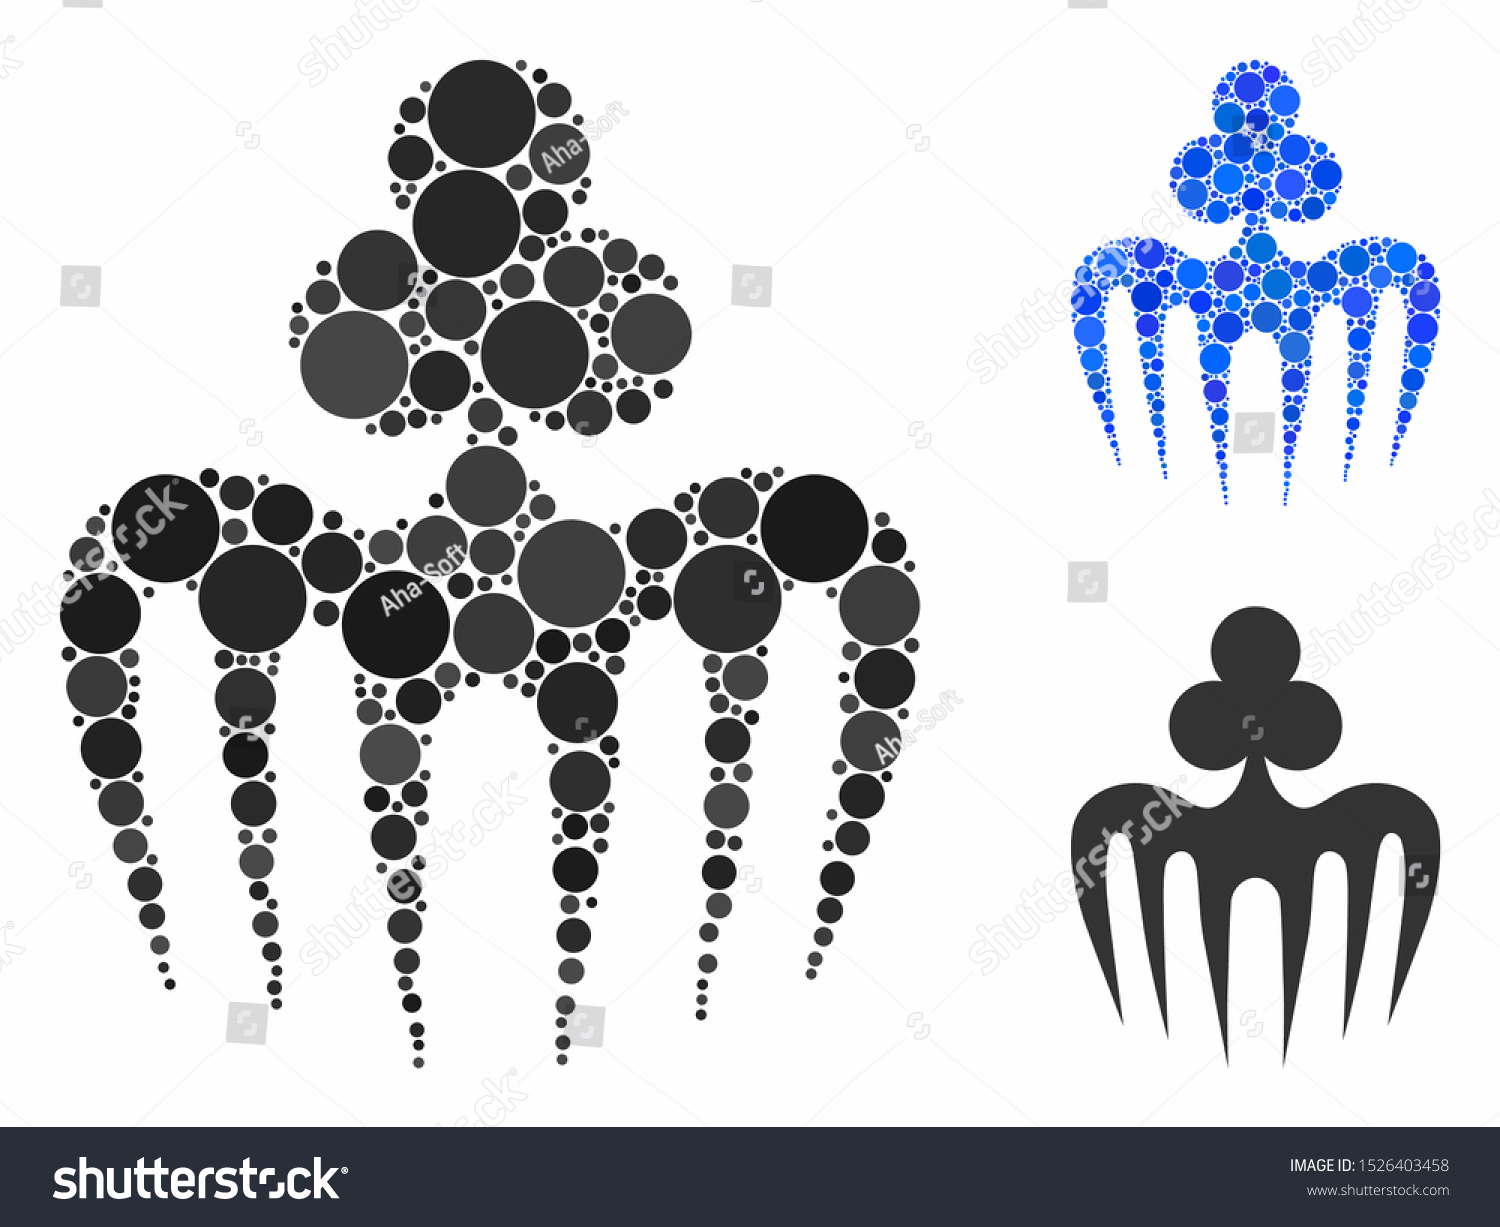 SVG of Gambling spectre monster composition for gambling spectre monster icon of round dots in variable sizes and color tones. Vector round dots are combined into blue illustration. svg